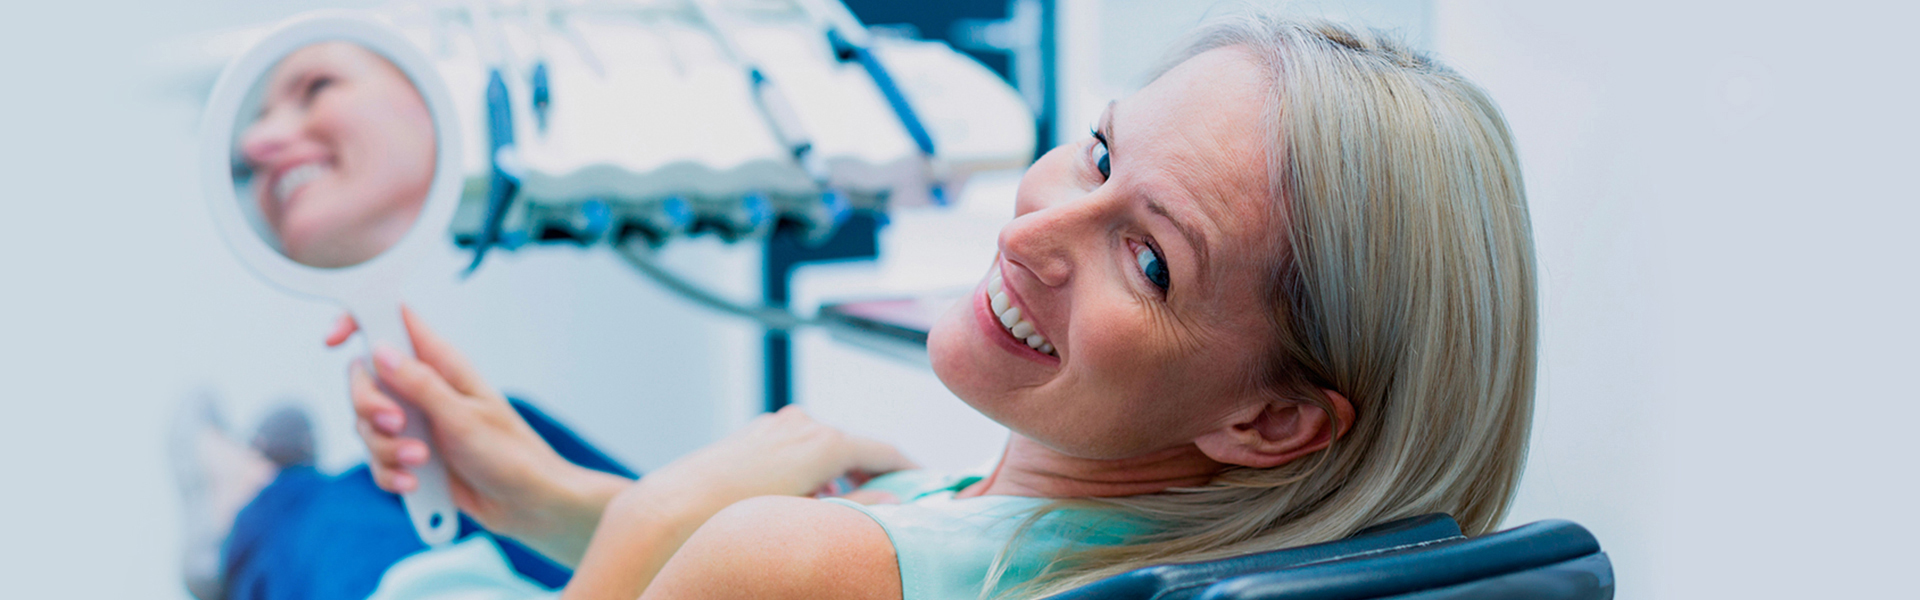 get your appointment for dental implants before easter